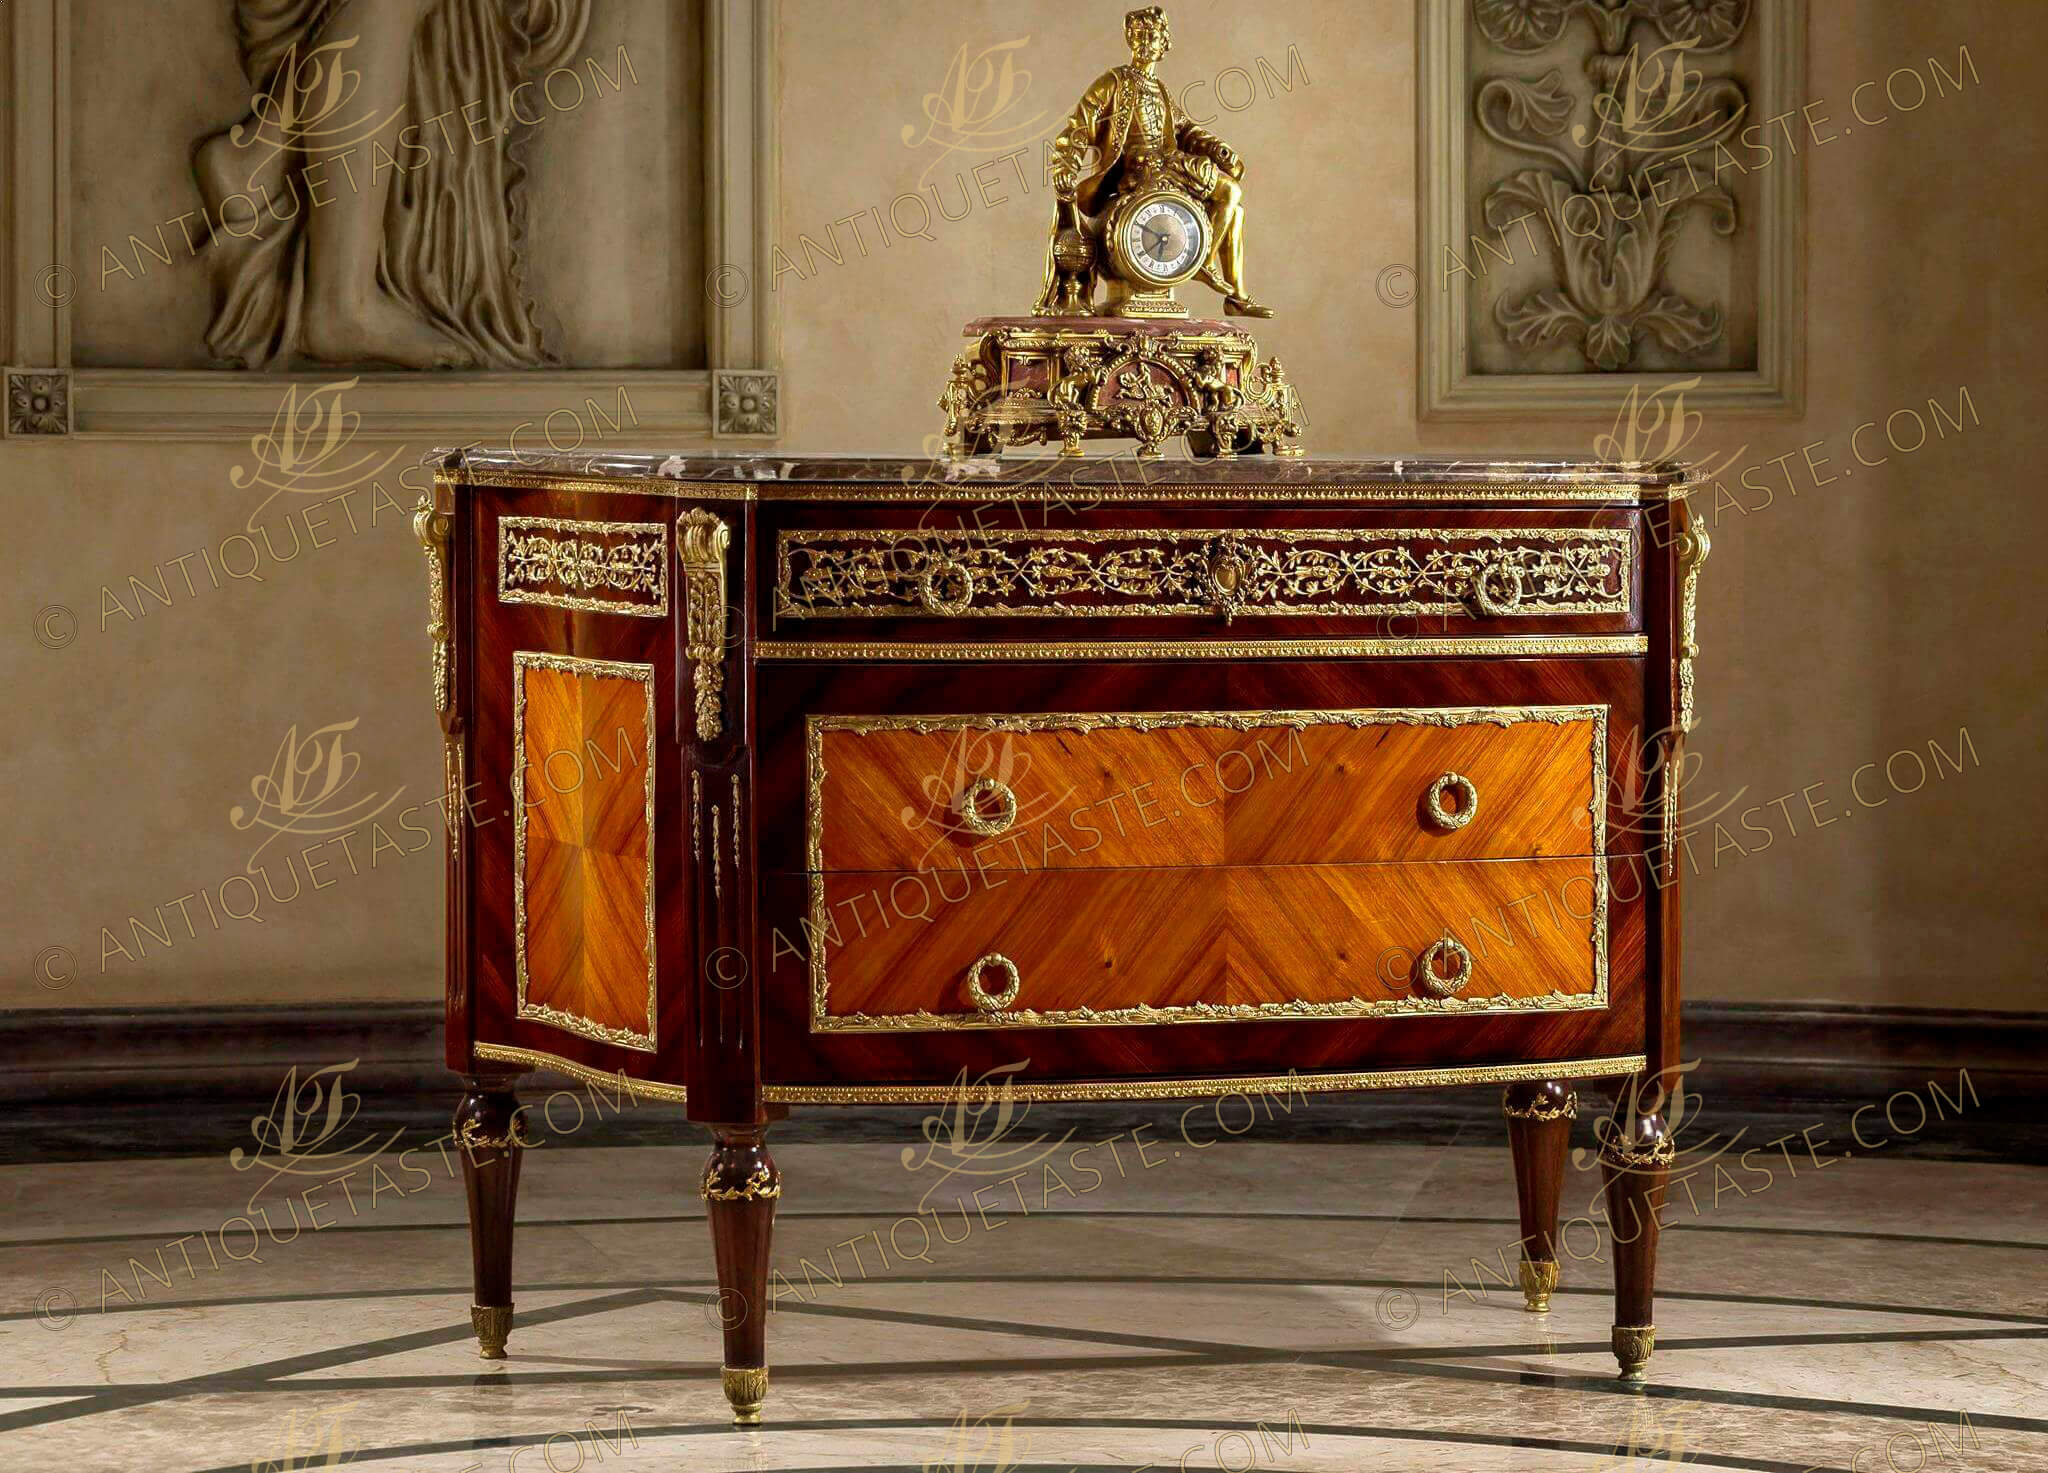 A Louis XVI style gilt-ormolu mounted quarter veneered commode after the model by Jean-Francois Leleu and François Linke Paris, circa 1900 Of D form surmounted by a fine veined eared marble top, above a panelled ormolu-vine-mounted frieze drawer, and boxwood stringing above a pair of quarter-veneered panelled drawers with reeded ring handles all within fine foliage ormolu encadrement, the fluted angles ornamented with ormolu floral chandelles and headed with scrolled acanthus and oak-leaf clasped volutes, on ormolu ornamented circular tapering legs terminating in acanthus-capped feet